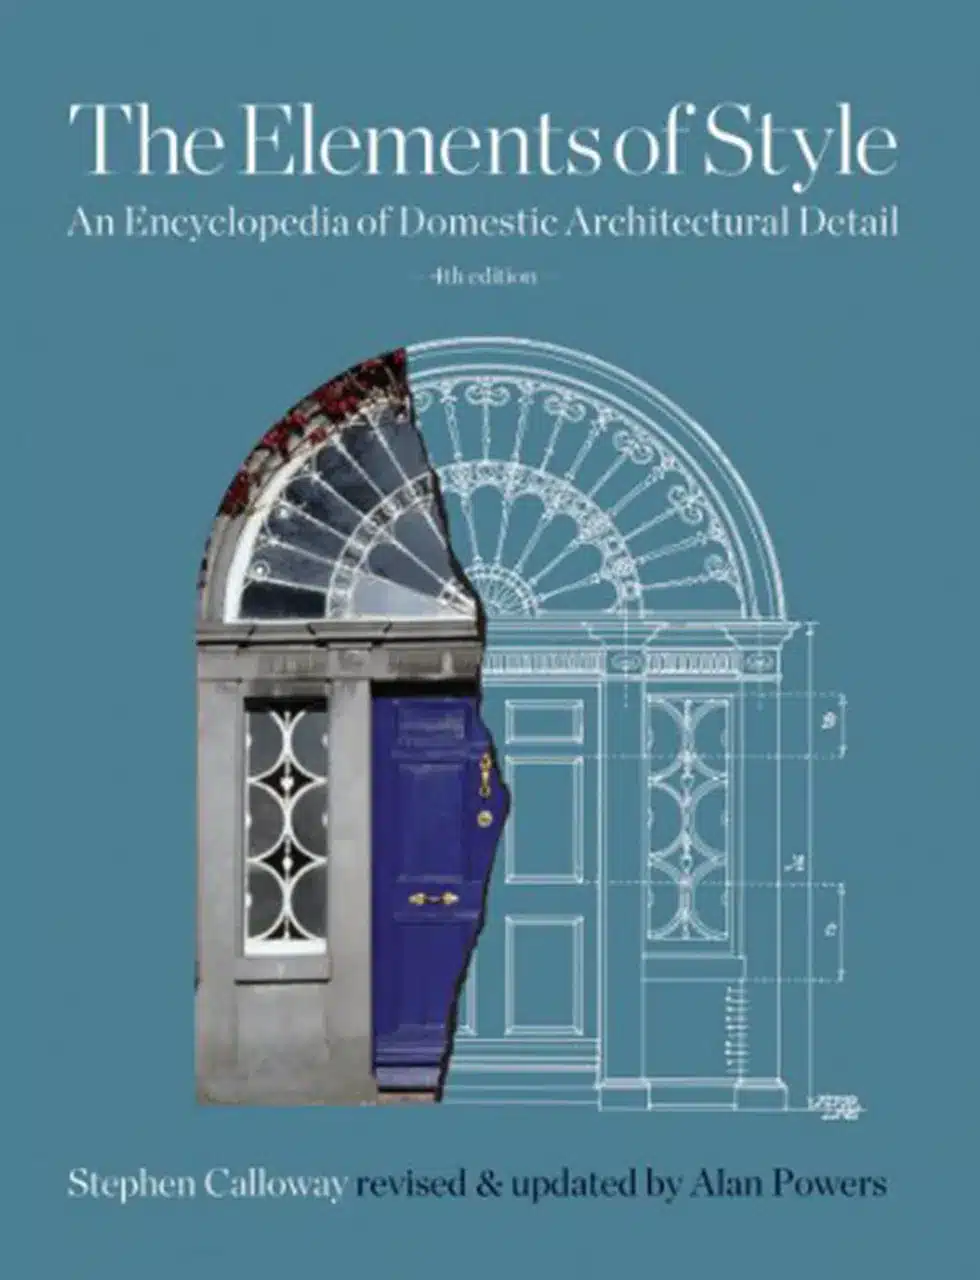 The elements of style is an important publication in architectural practice